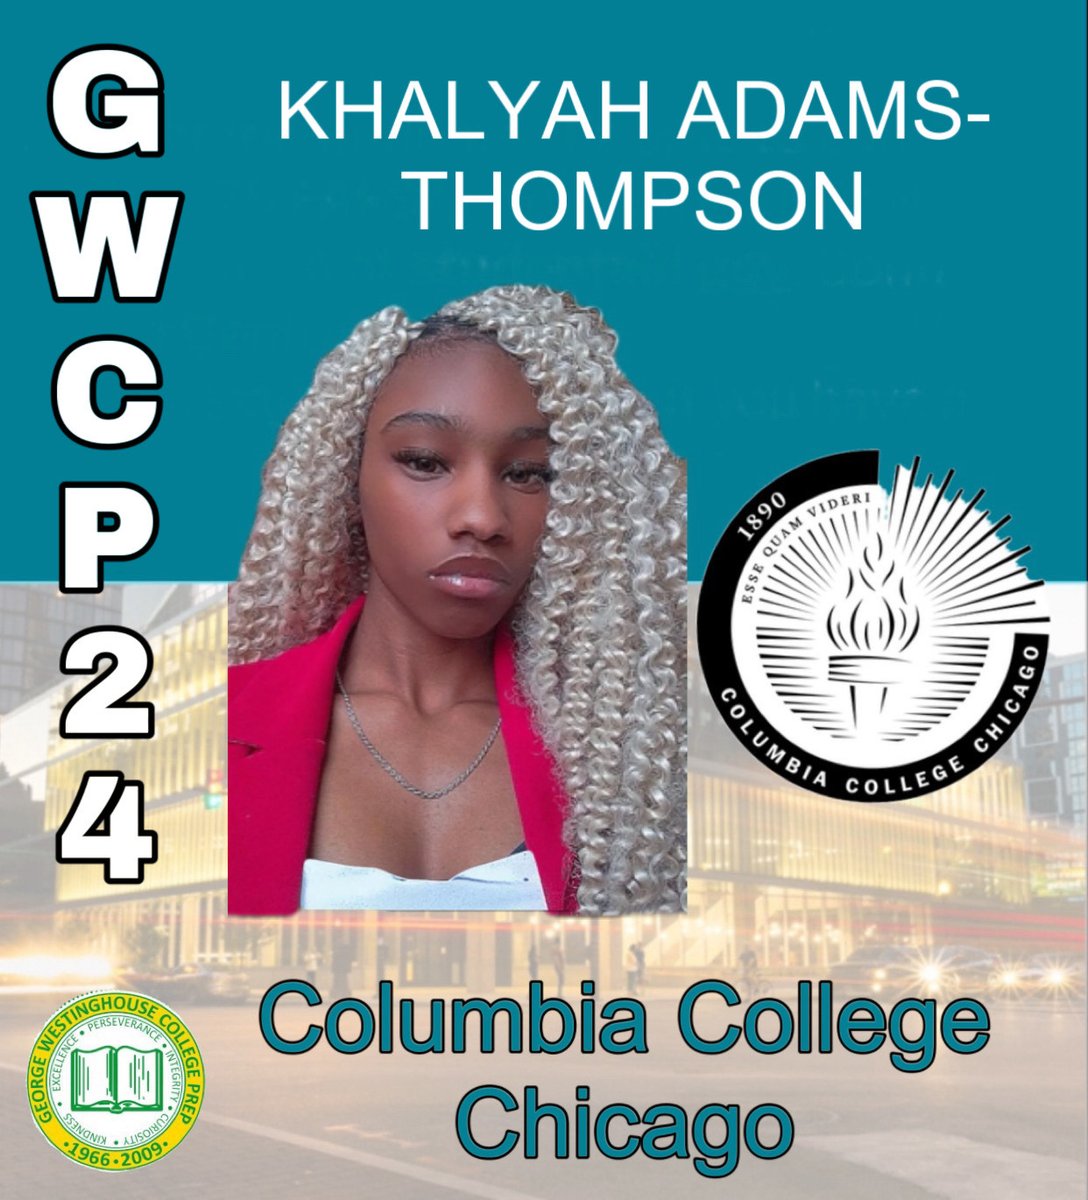 #Classof2024 is in countdown to #Graduation mode! We will be featuring some of our grads & their college decisions over the next 2 weeks. Kicking it off is Khalyah who will showcase her talents act @ColumbiaChi.